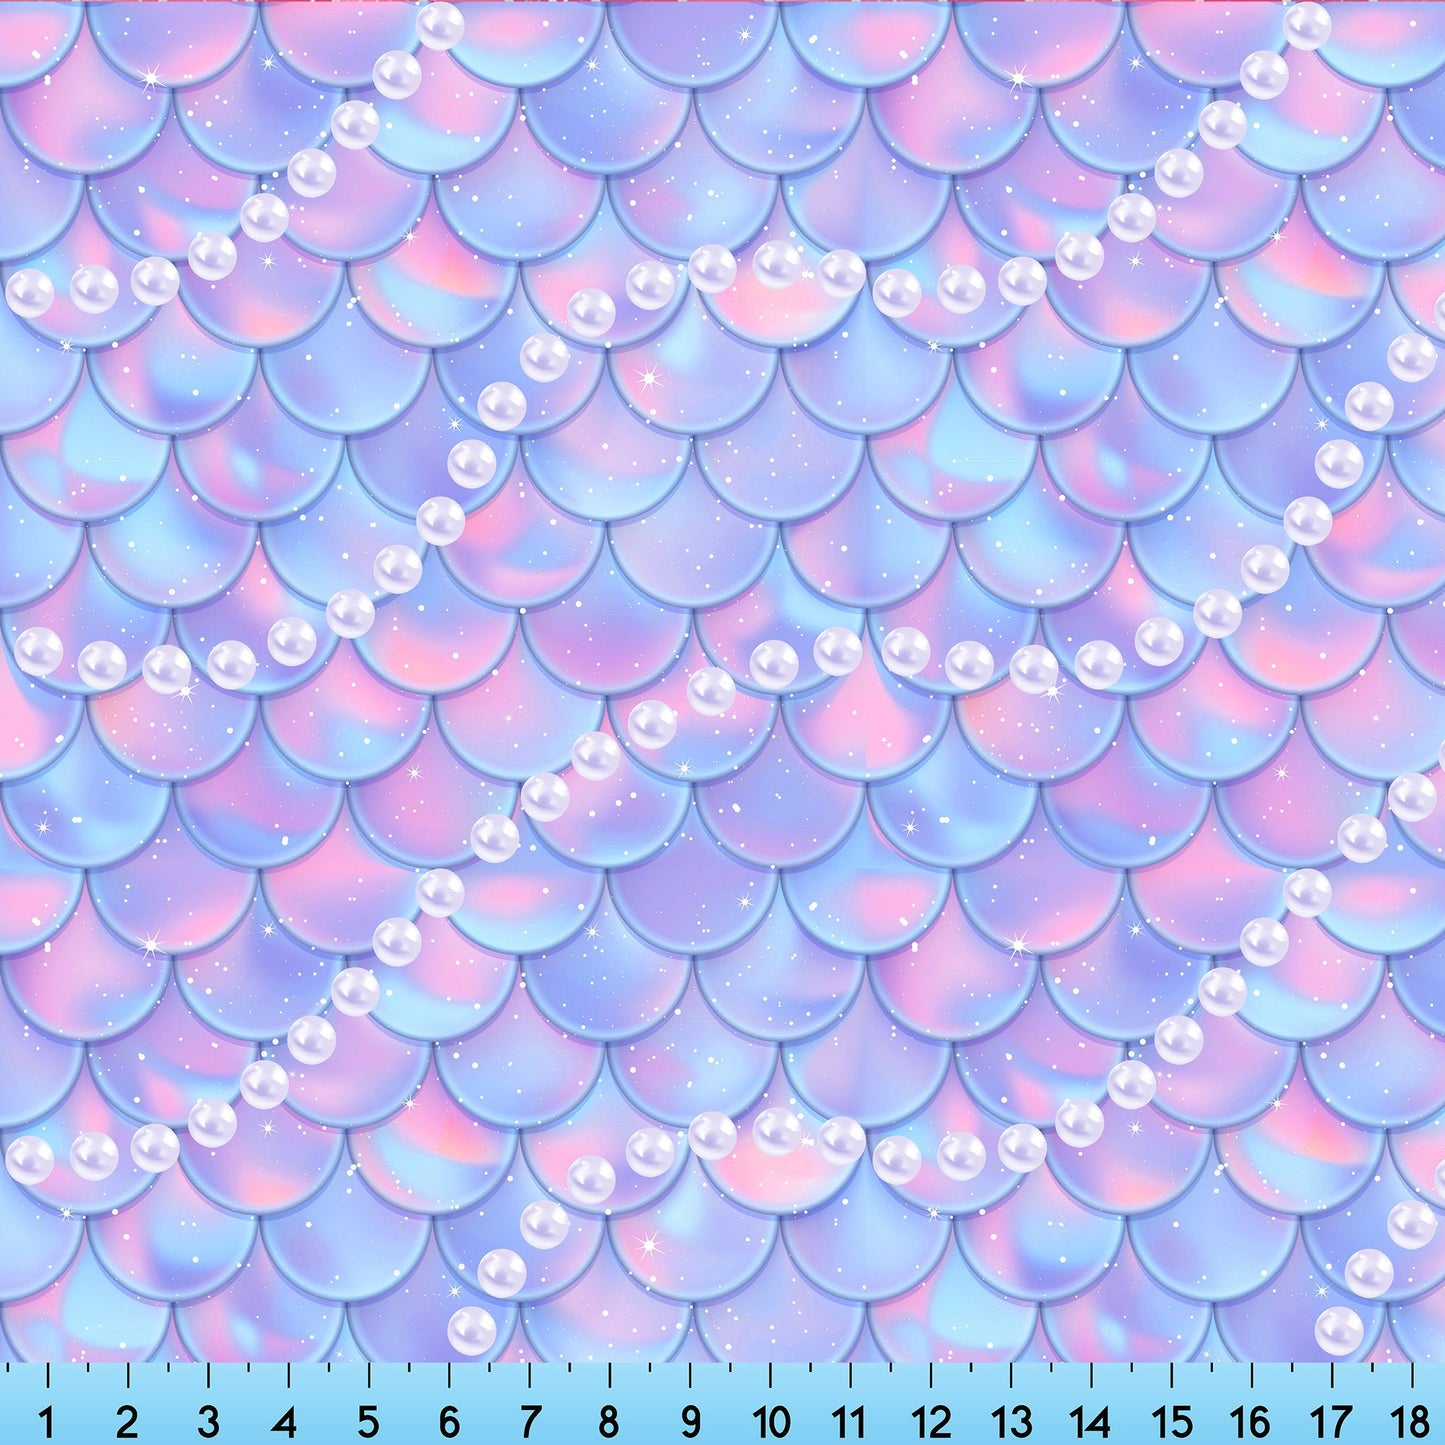 Mermaid Scales Pink Pearls Fabric By the Yard, Half Yard and Fat Quarter